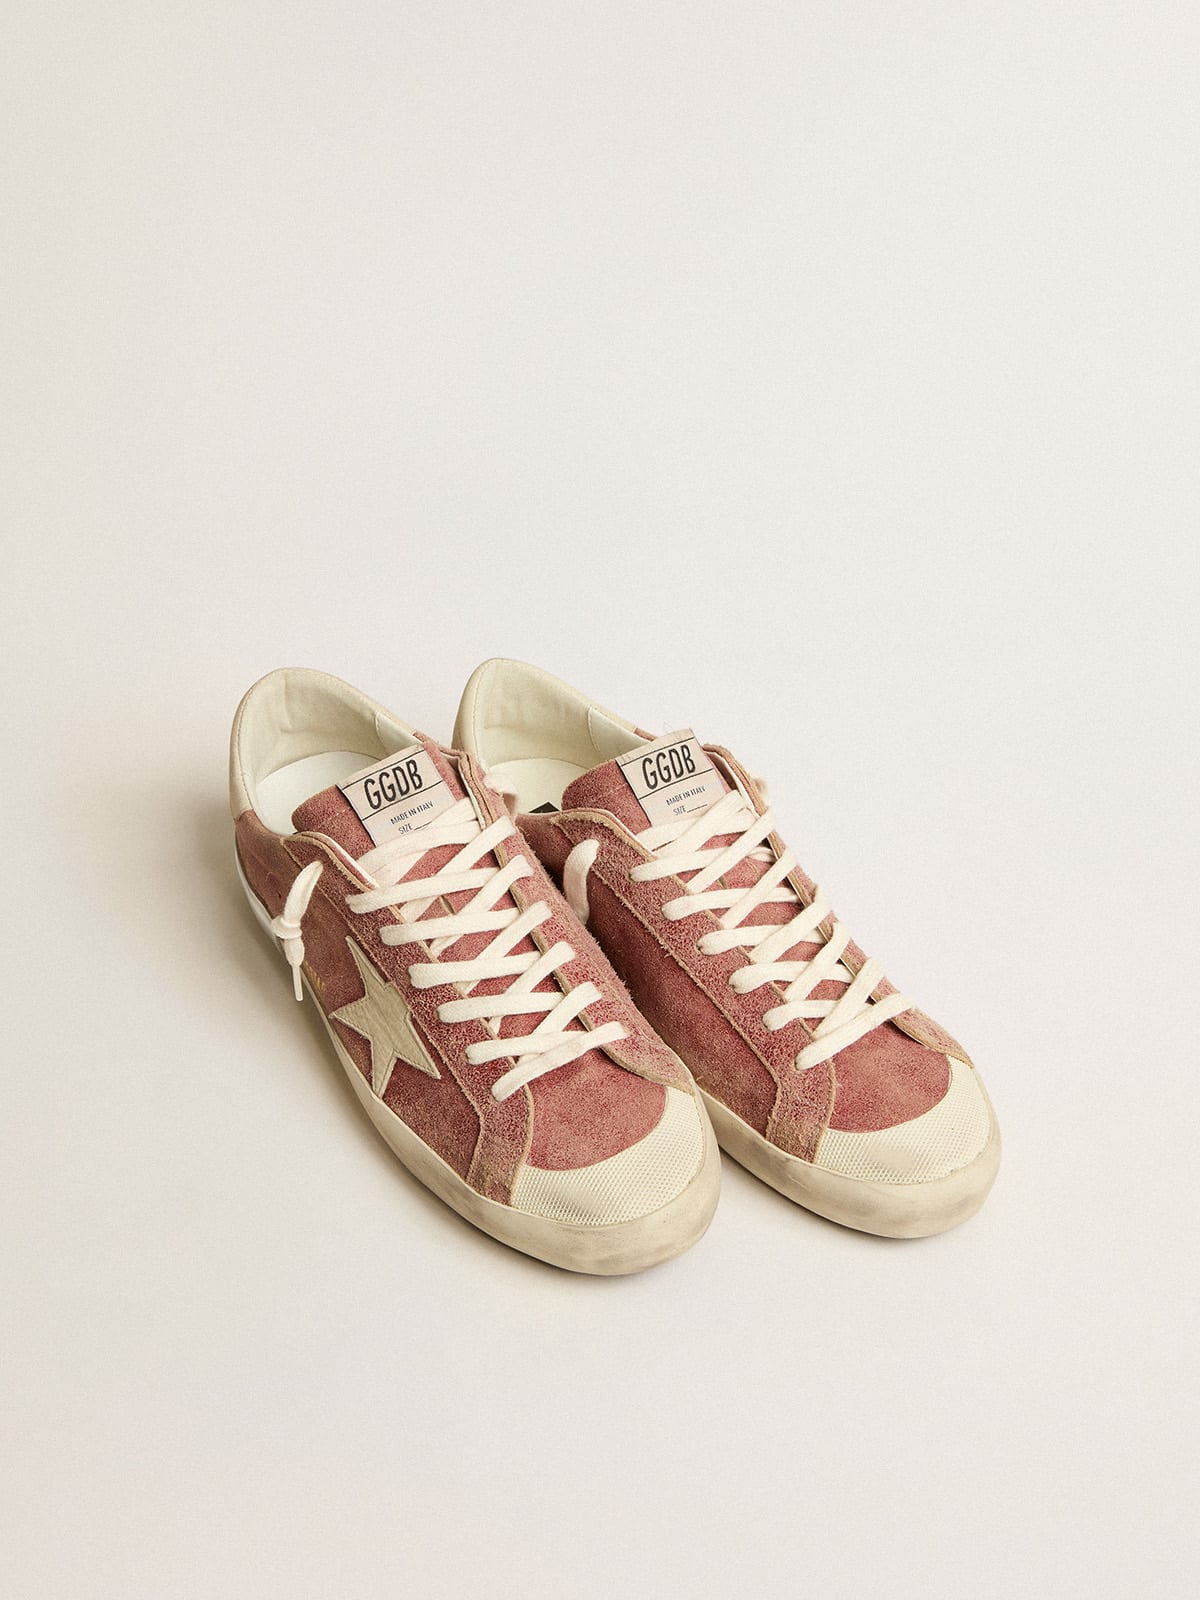 Golden Goose - Super-Star in red leather with cream nubuck star and heel tab in 